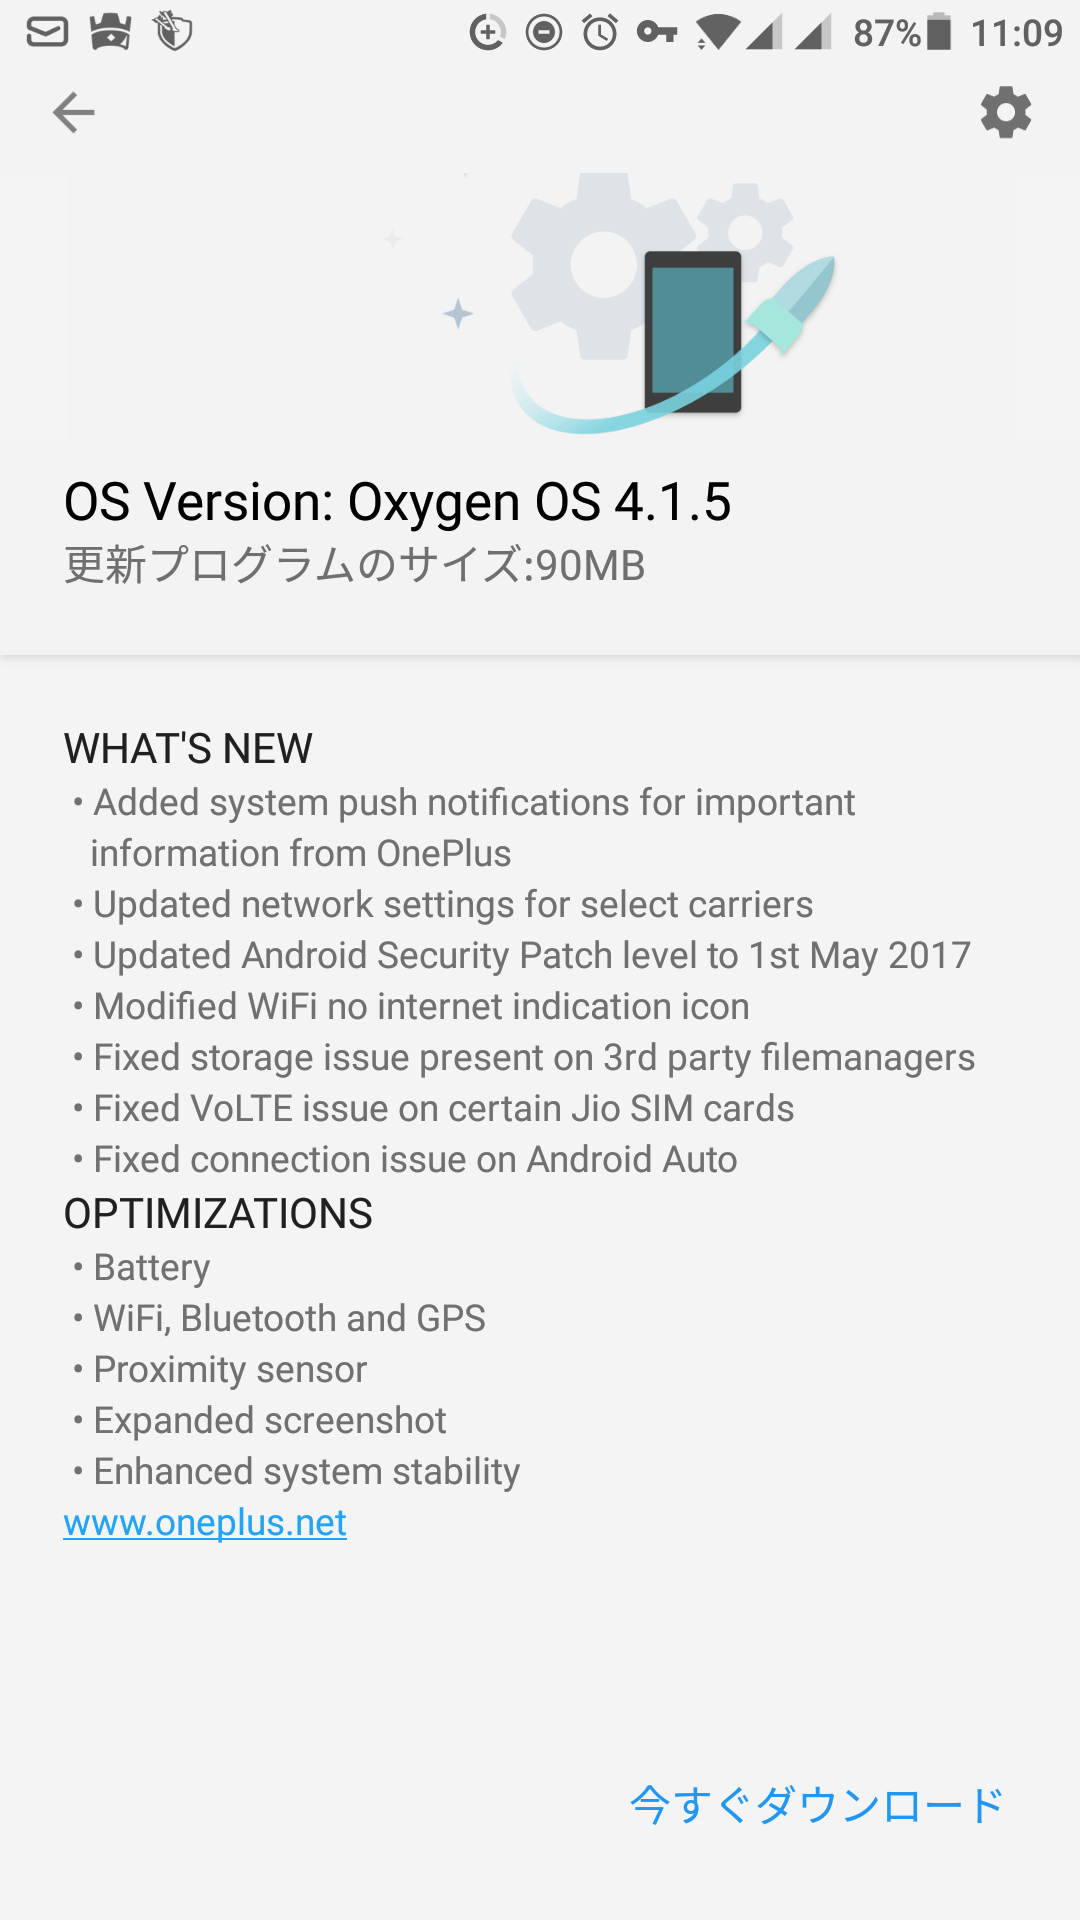 OnePlus releases OxygenOS 4.1.5 for the OnePlus 3 and 3T devices, contains new features 3